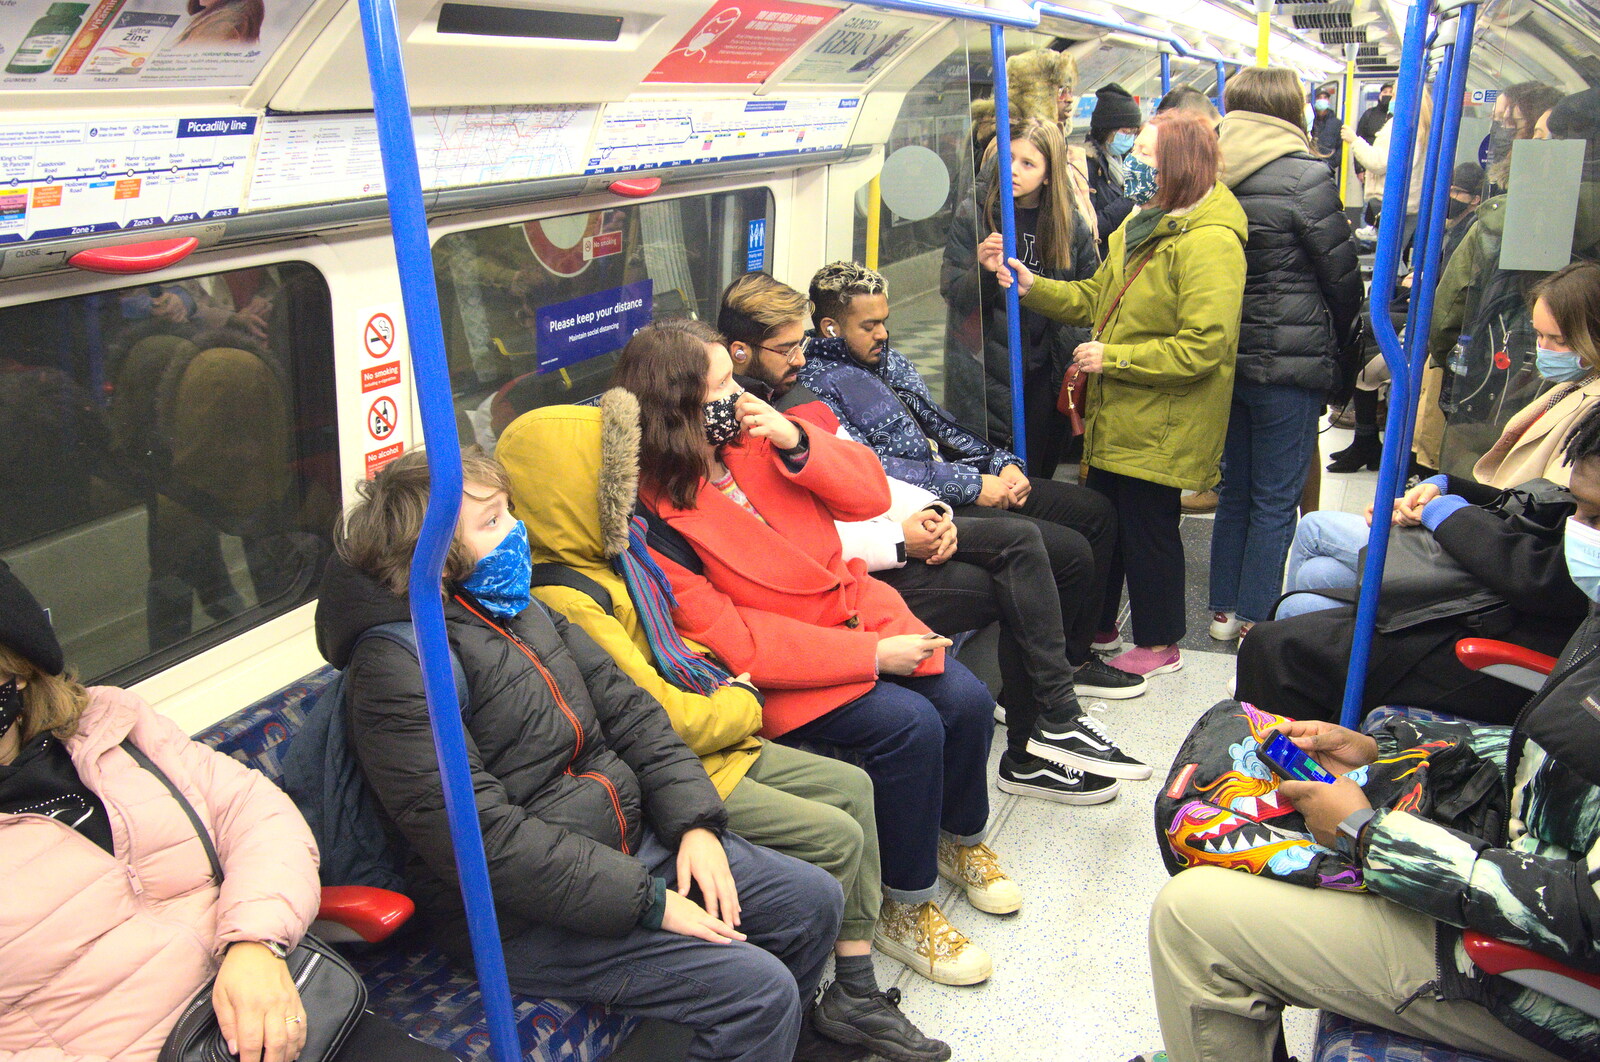 Isobel and the boys on the tube from A Trip to the Natural History Museum, Kensington, London - 15th January 2022